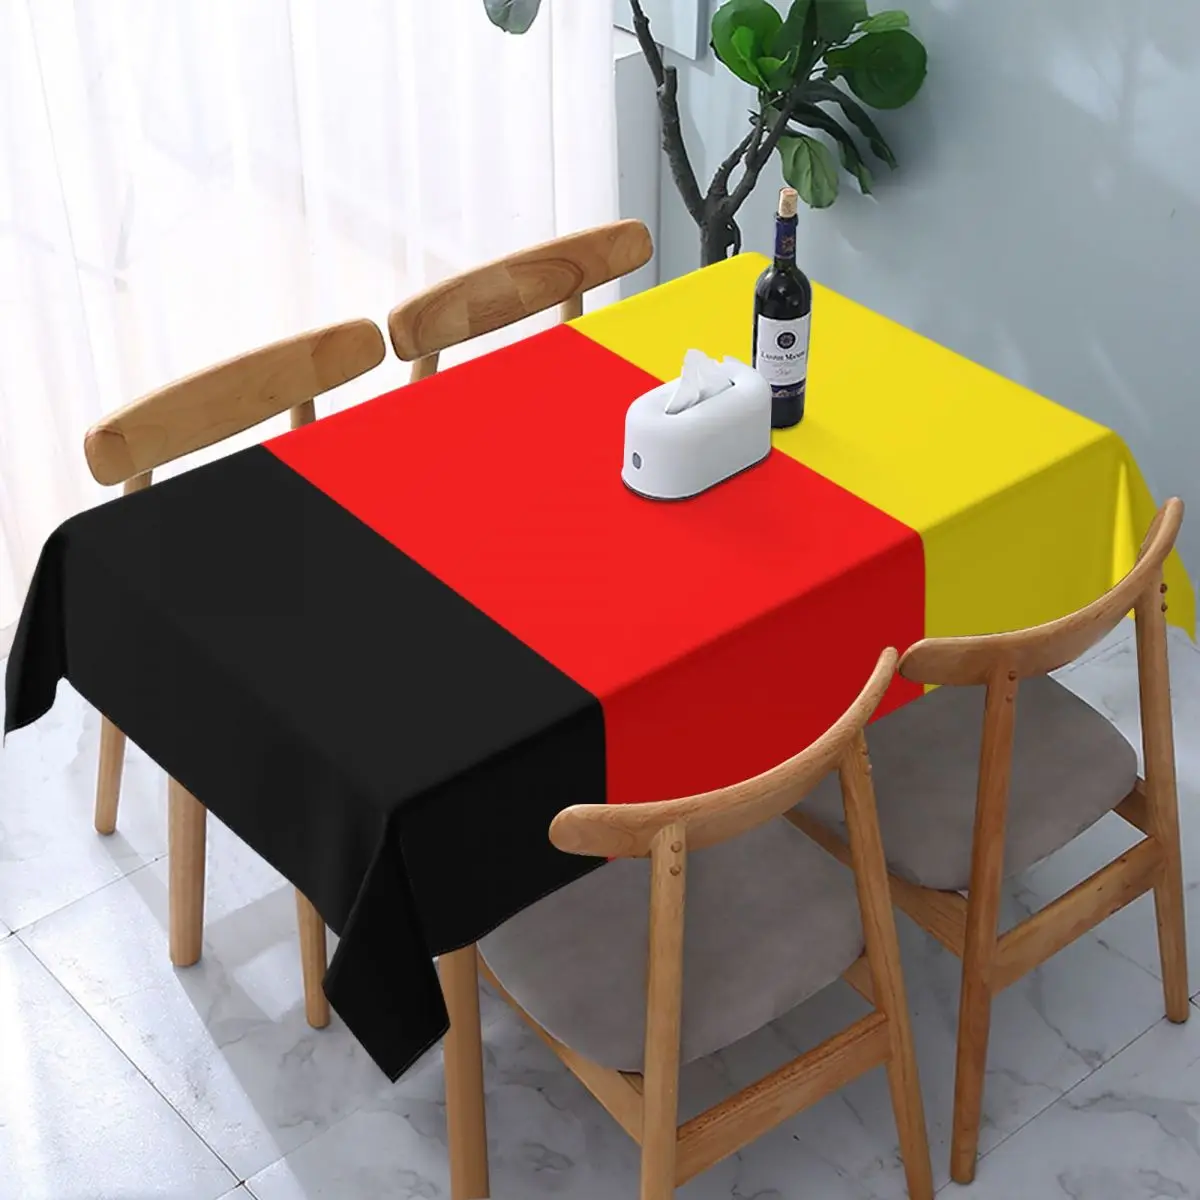 

Rectangular Belgium Flag Belgian Pride Table Cloth Oilproof Tablecloth 40"-44" Table Cover Backed with Elastic Edge